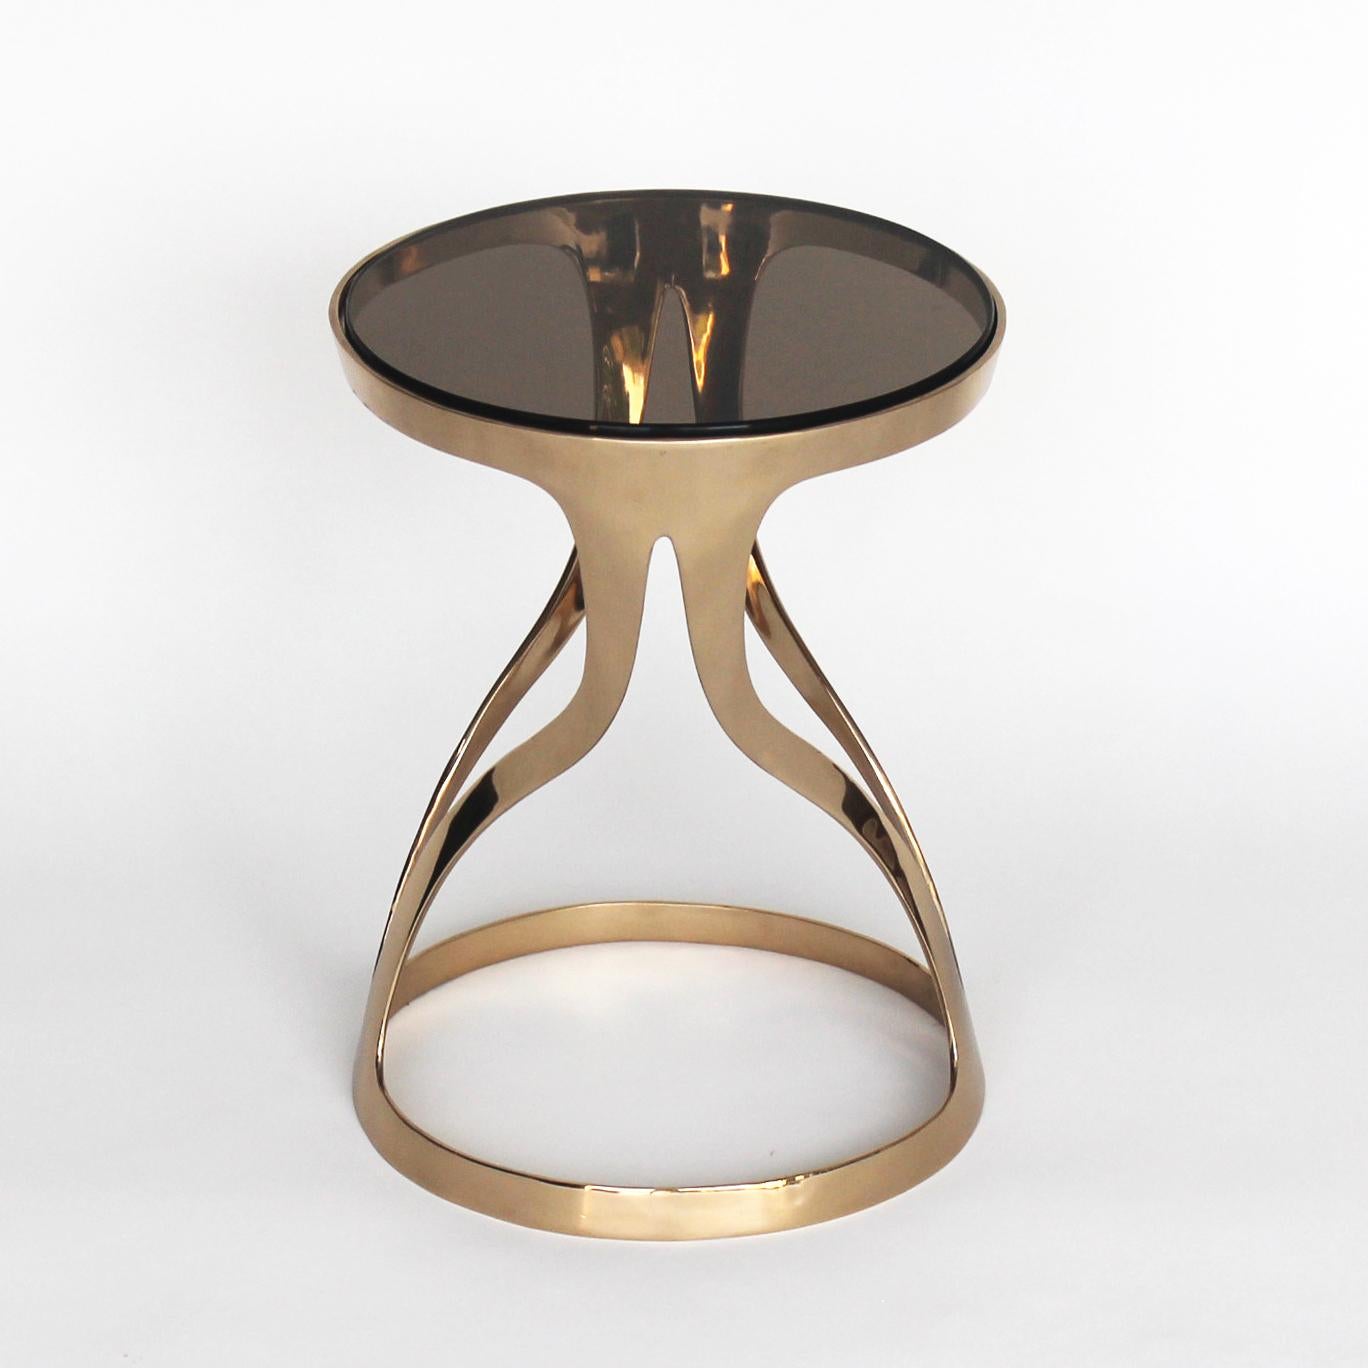 An elegant and sophisticated profile define the Lyra table with an infinite bi-directional flowing movement. Cast in bronze and hand polished with a smoked tinted glass top.

Hand forged and cast bronze pieces bare the marks of artisanal creation